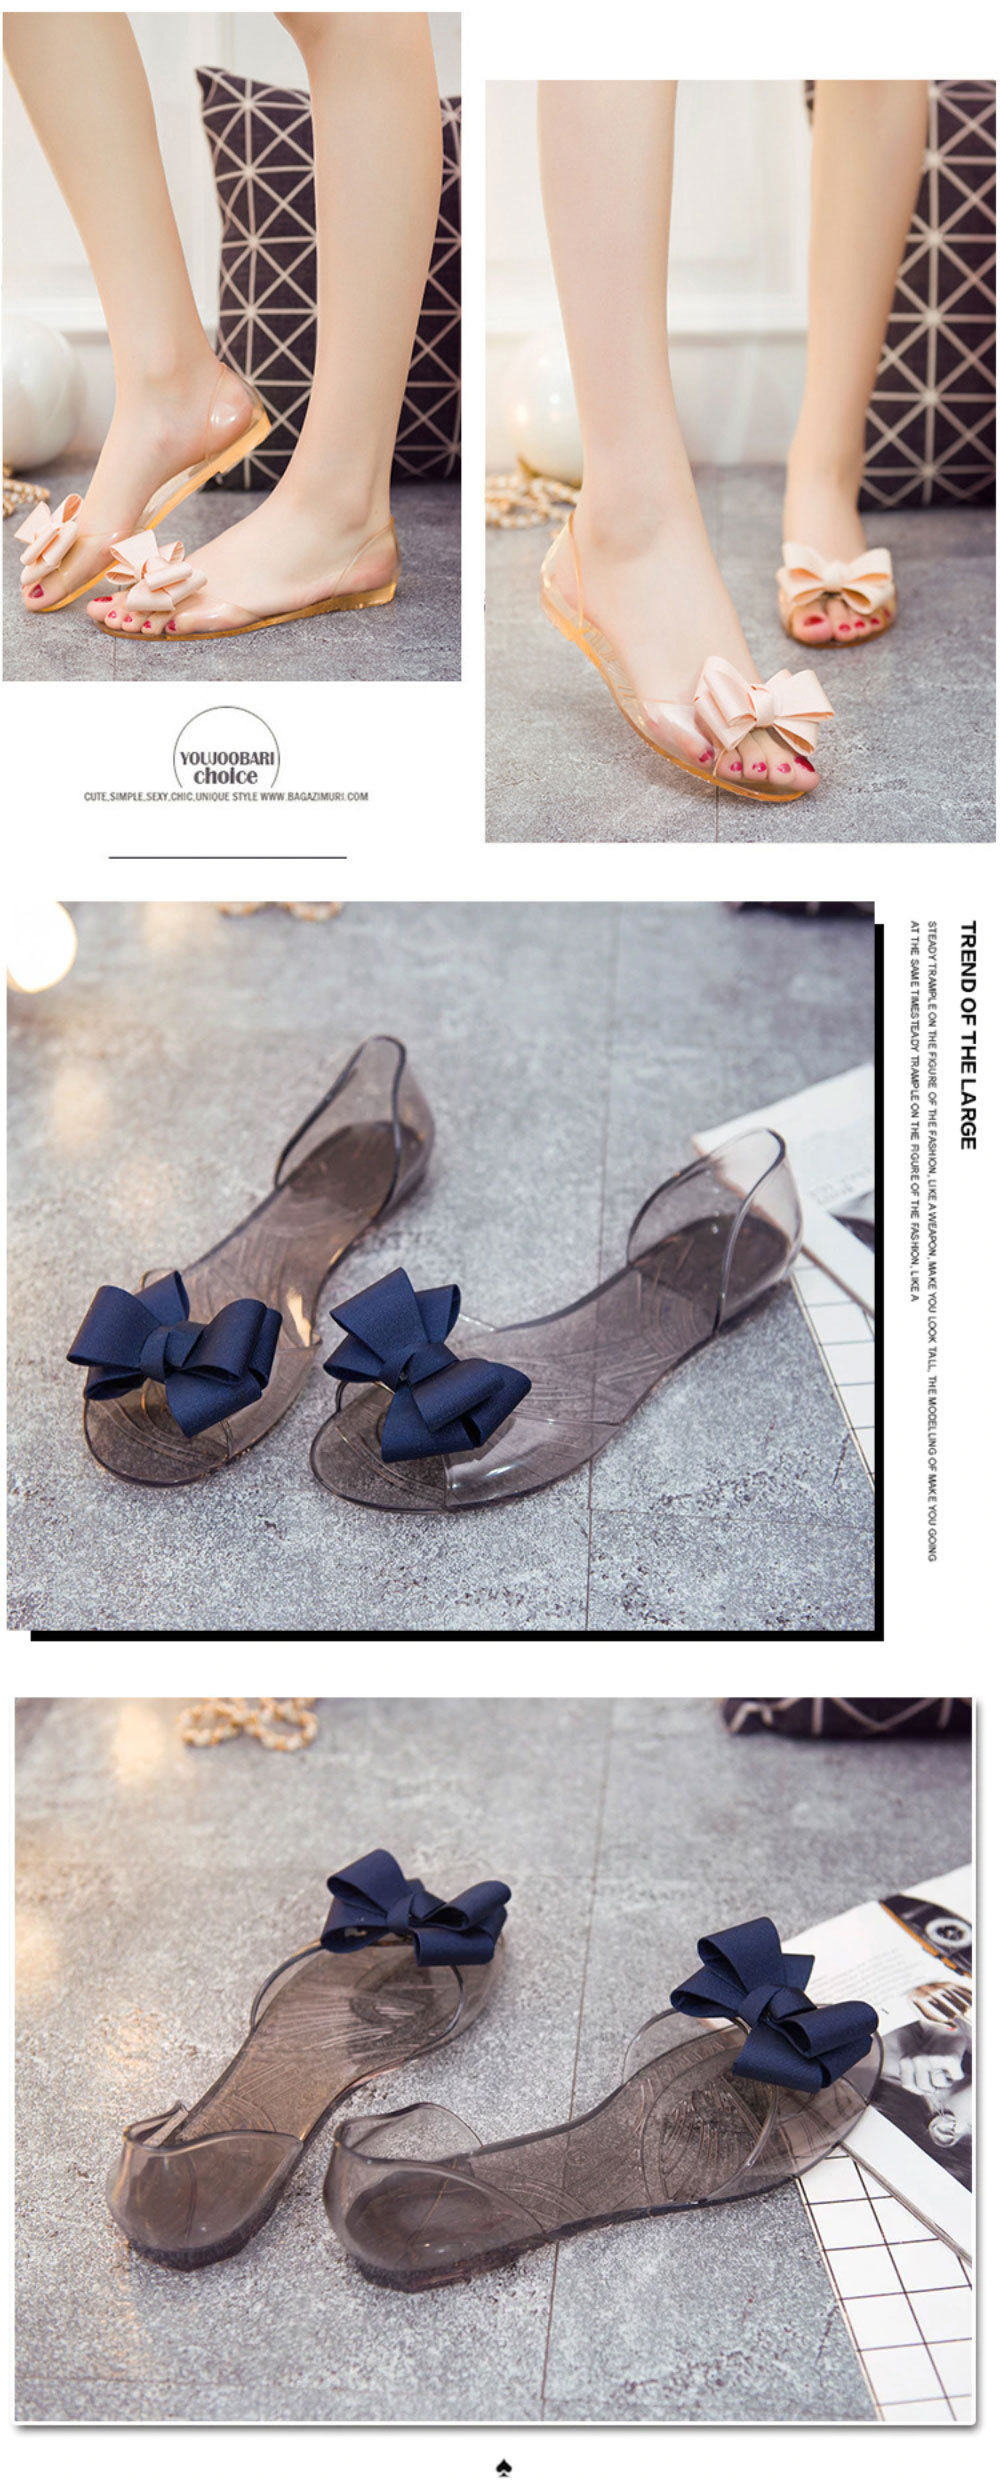 Clear Jelly Sandals with Bows - ApolloBox